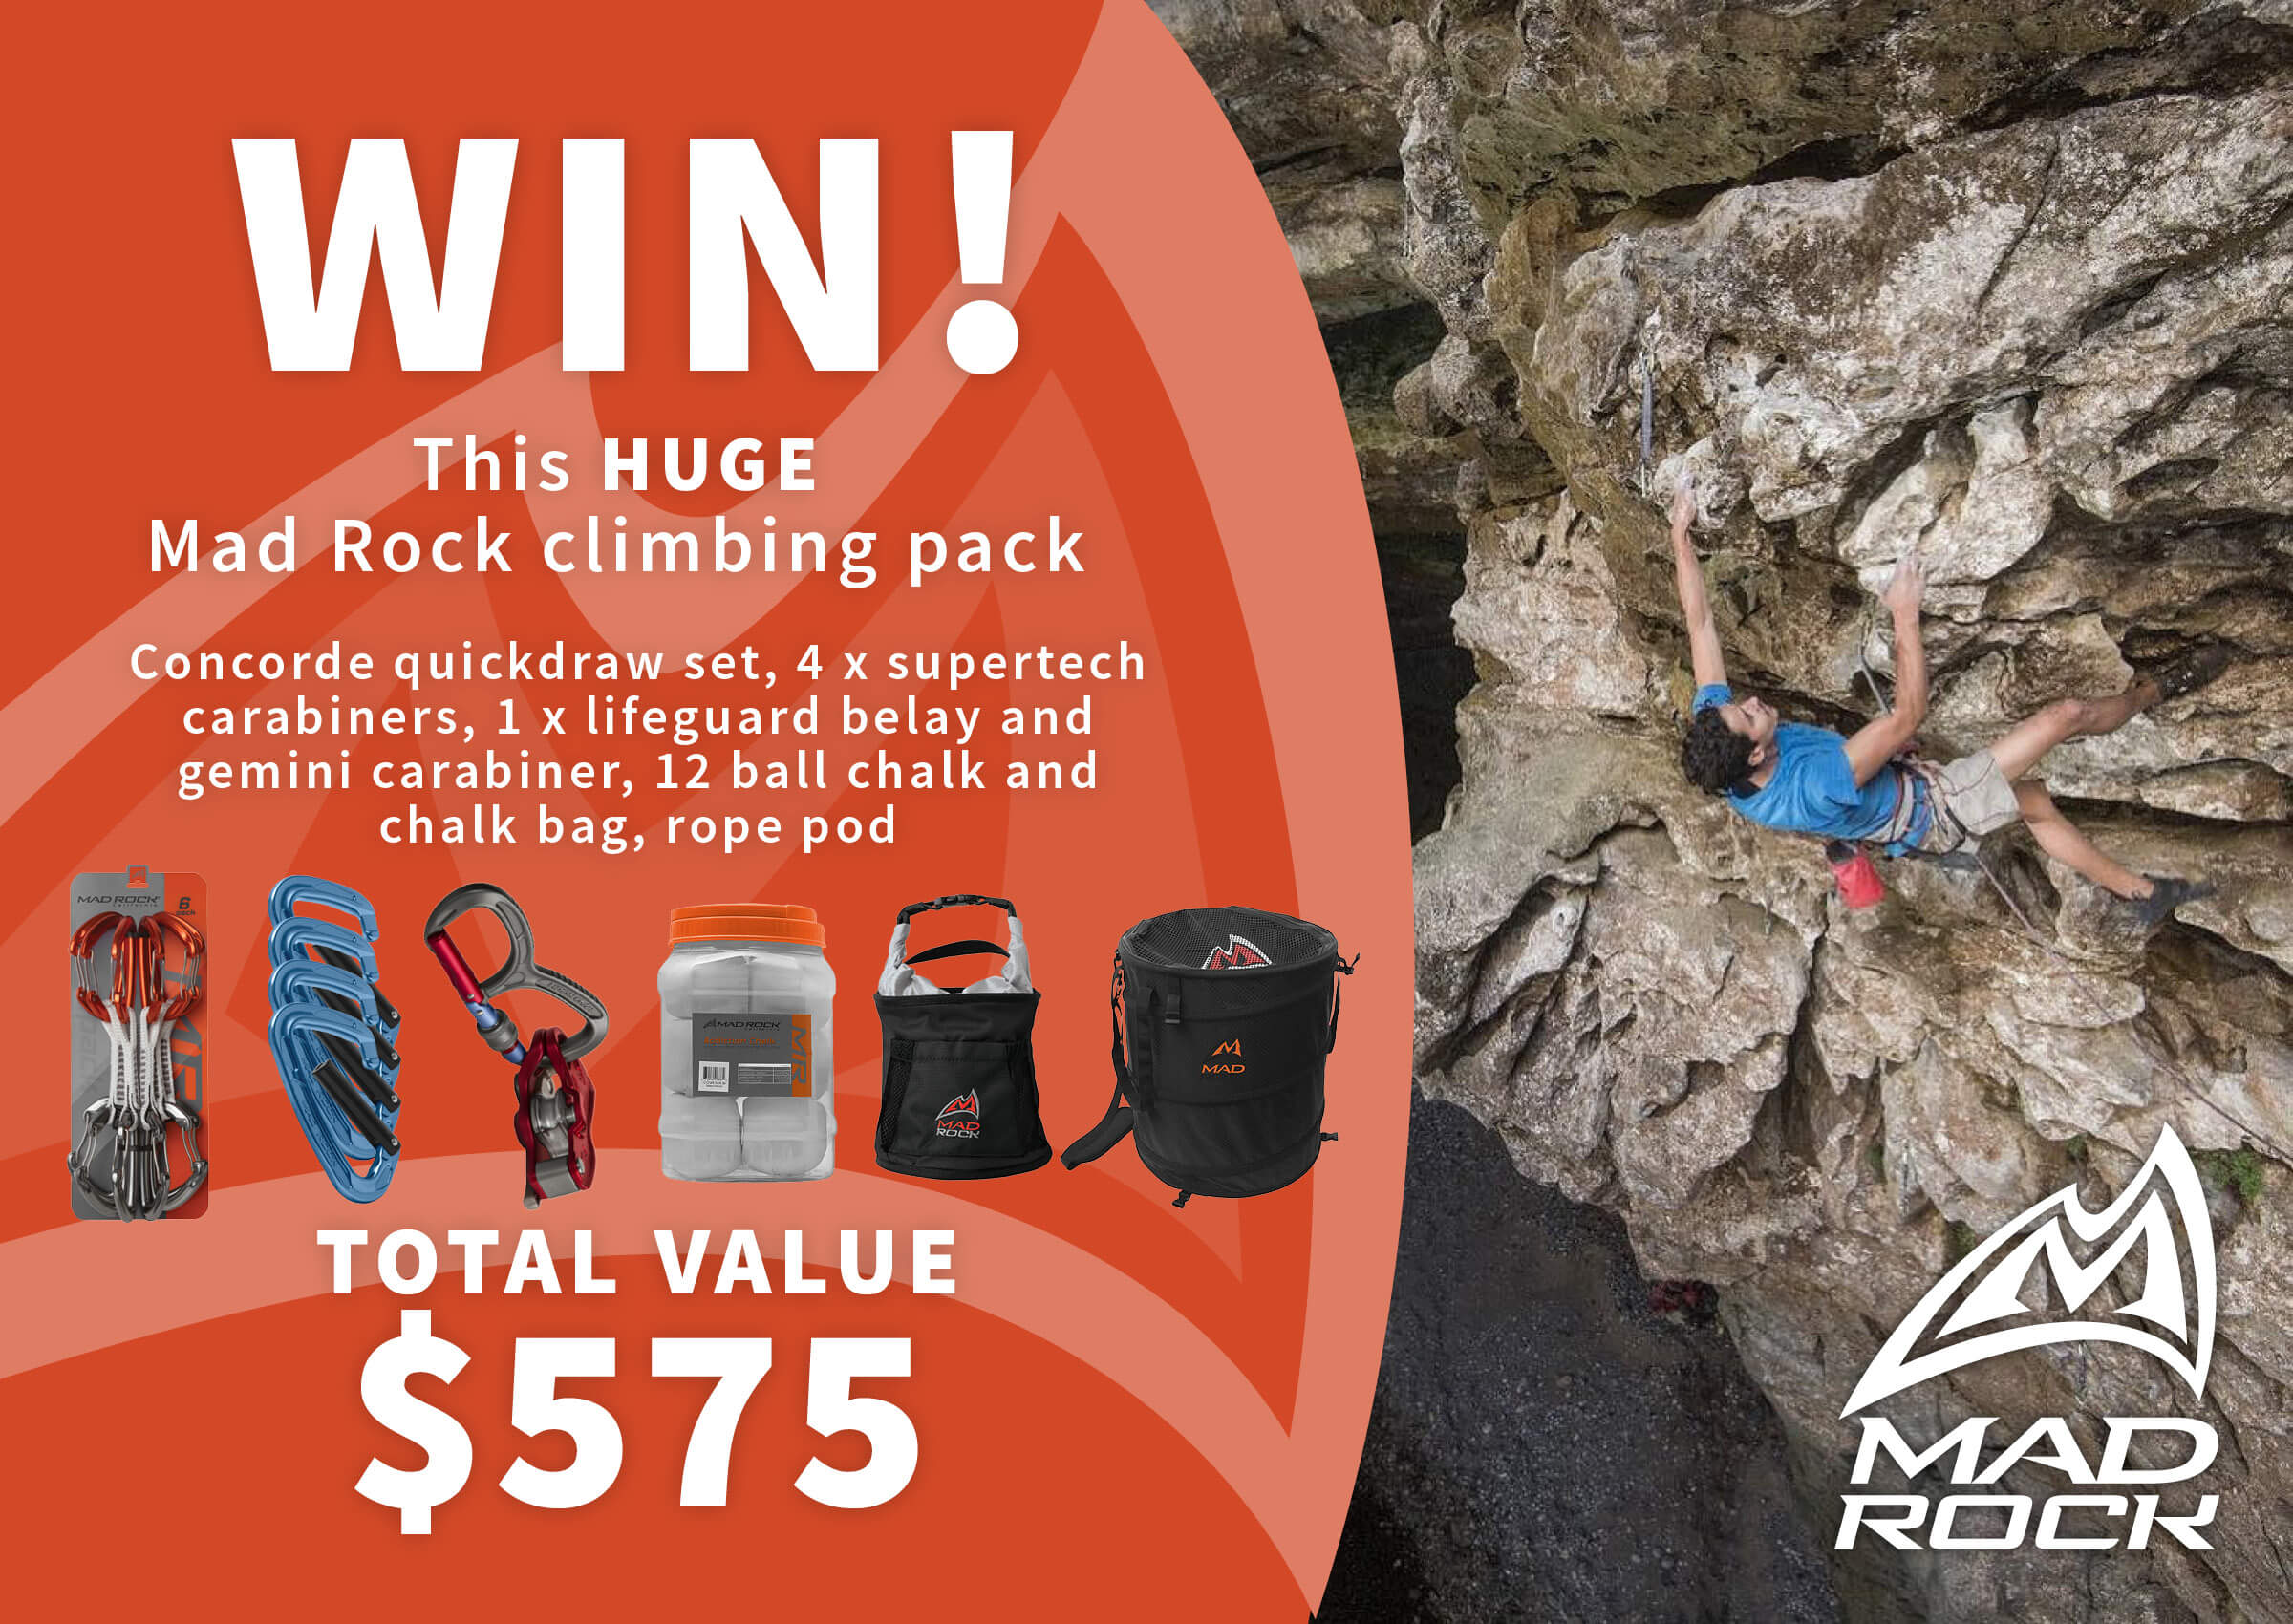 Win a Mad Rock Climbing Pack | Gearshop 